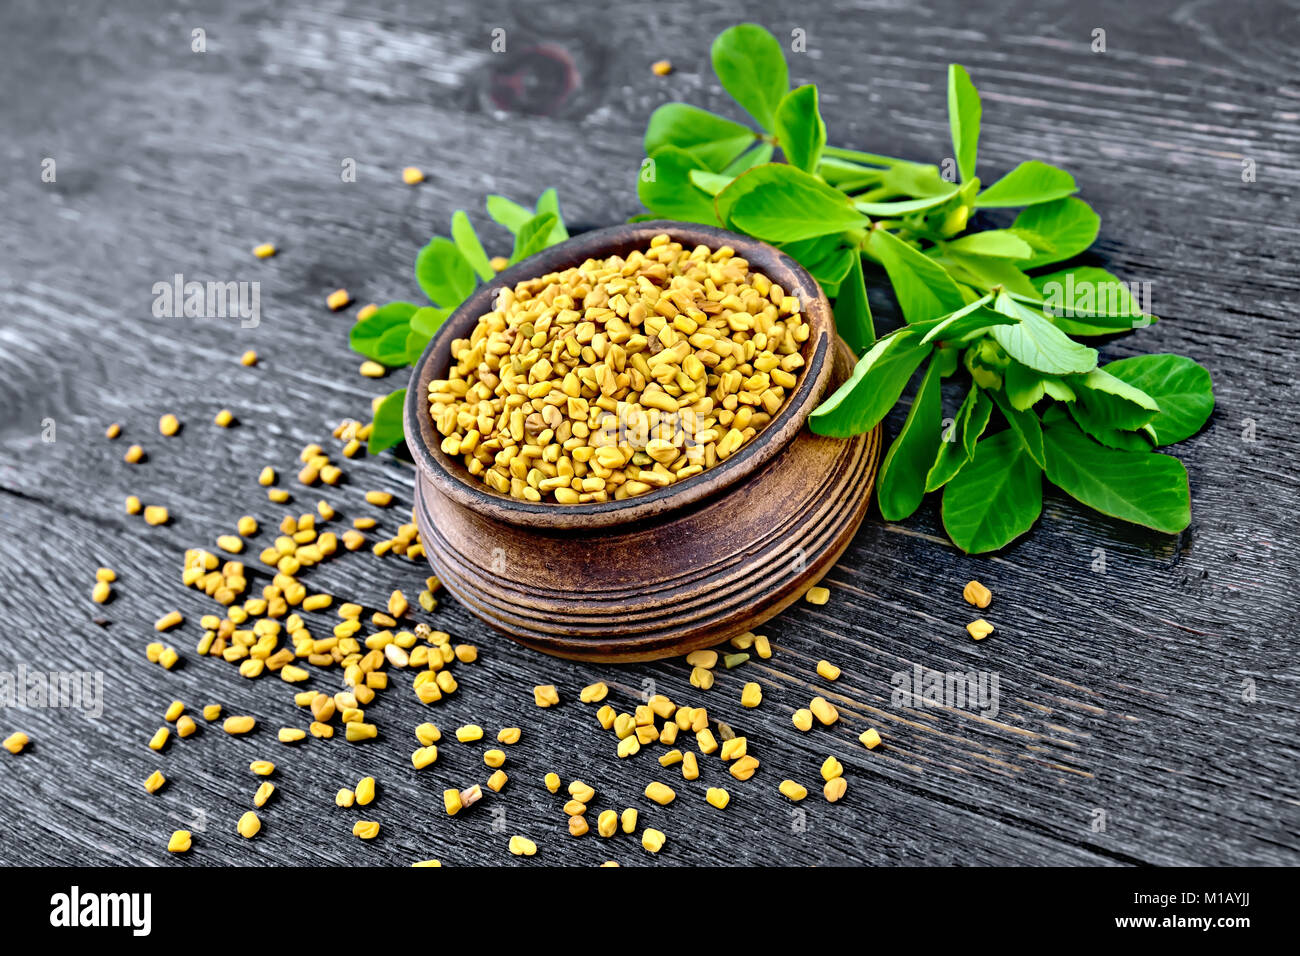 Fenugreek seeds in a bowl with green leaves on a wooden plank background Stock Photo